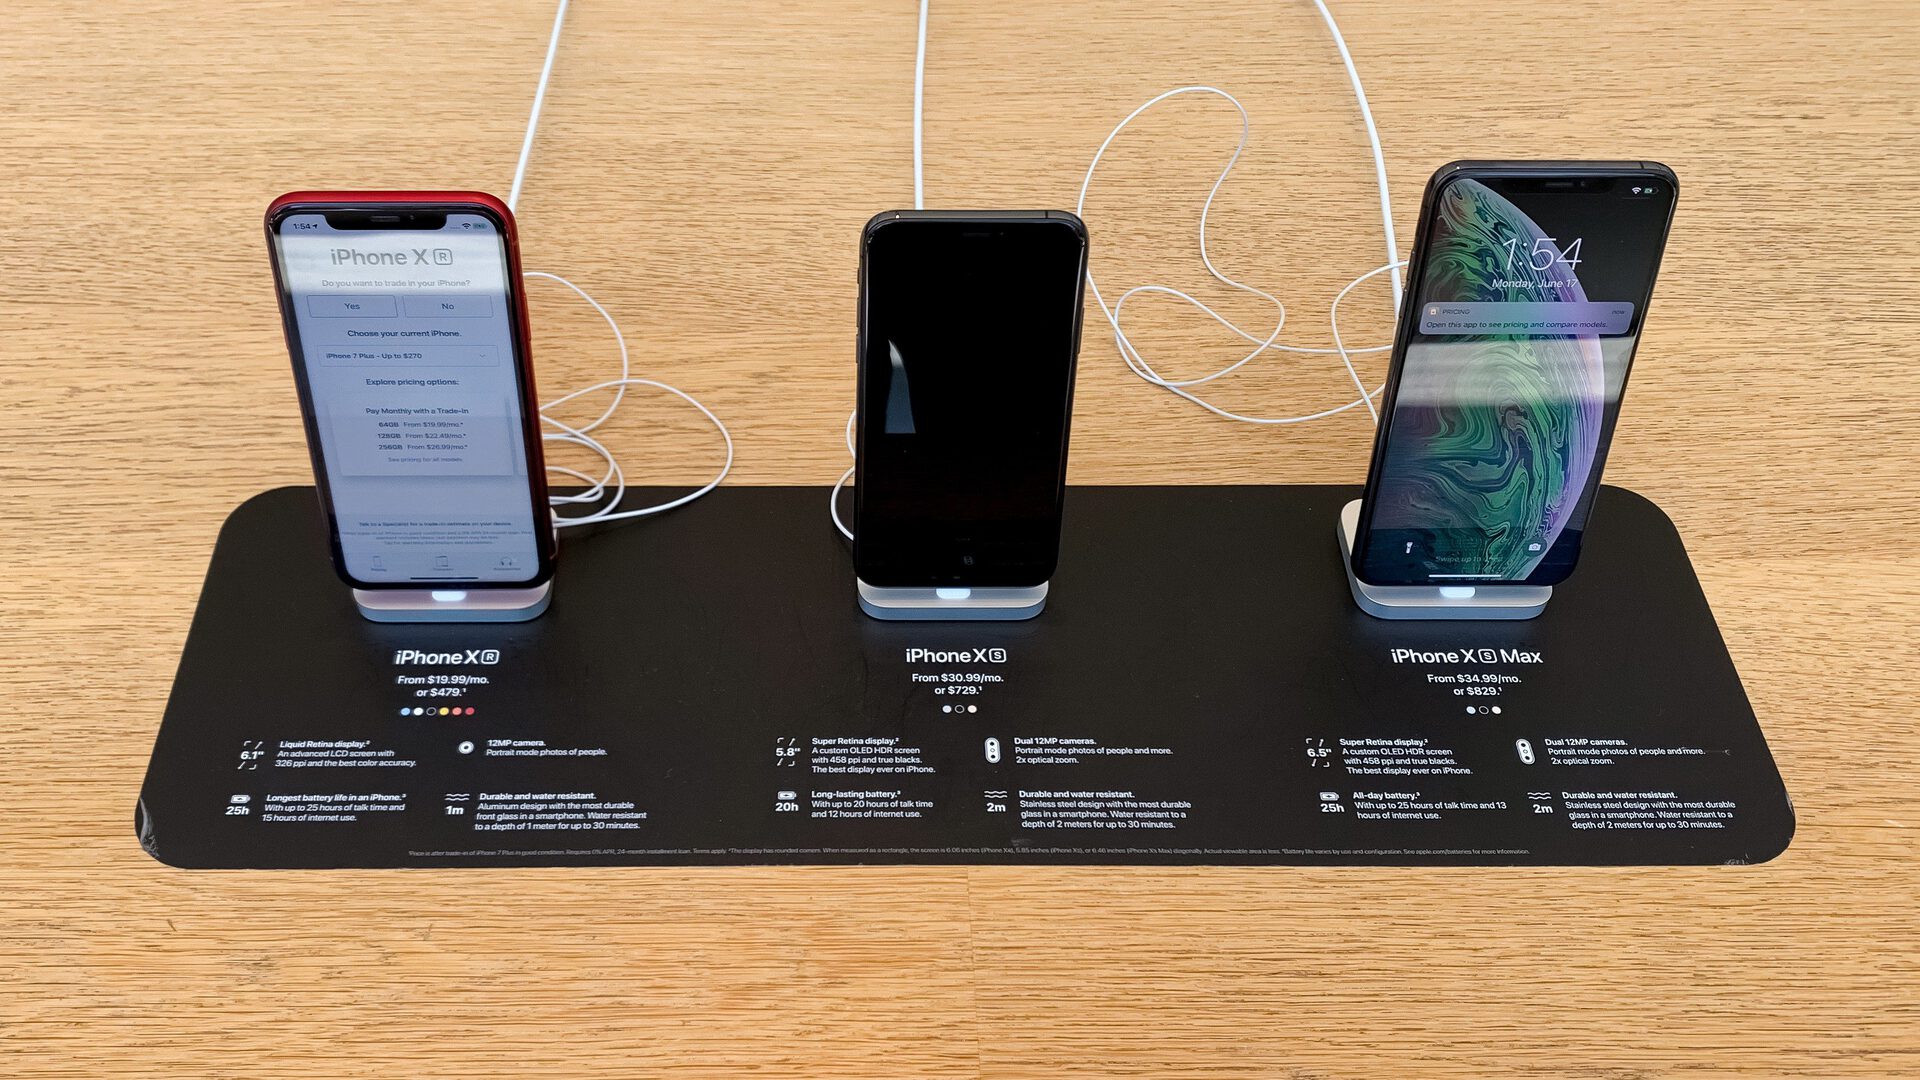 Examples of the new pricing information available in Apple Stores.